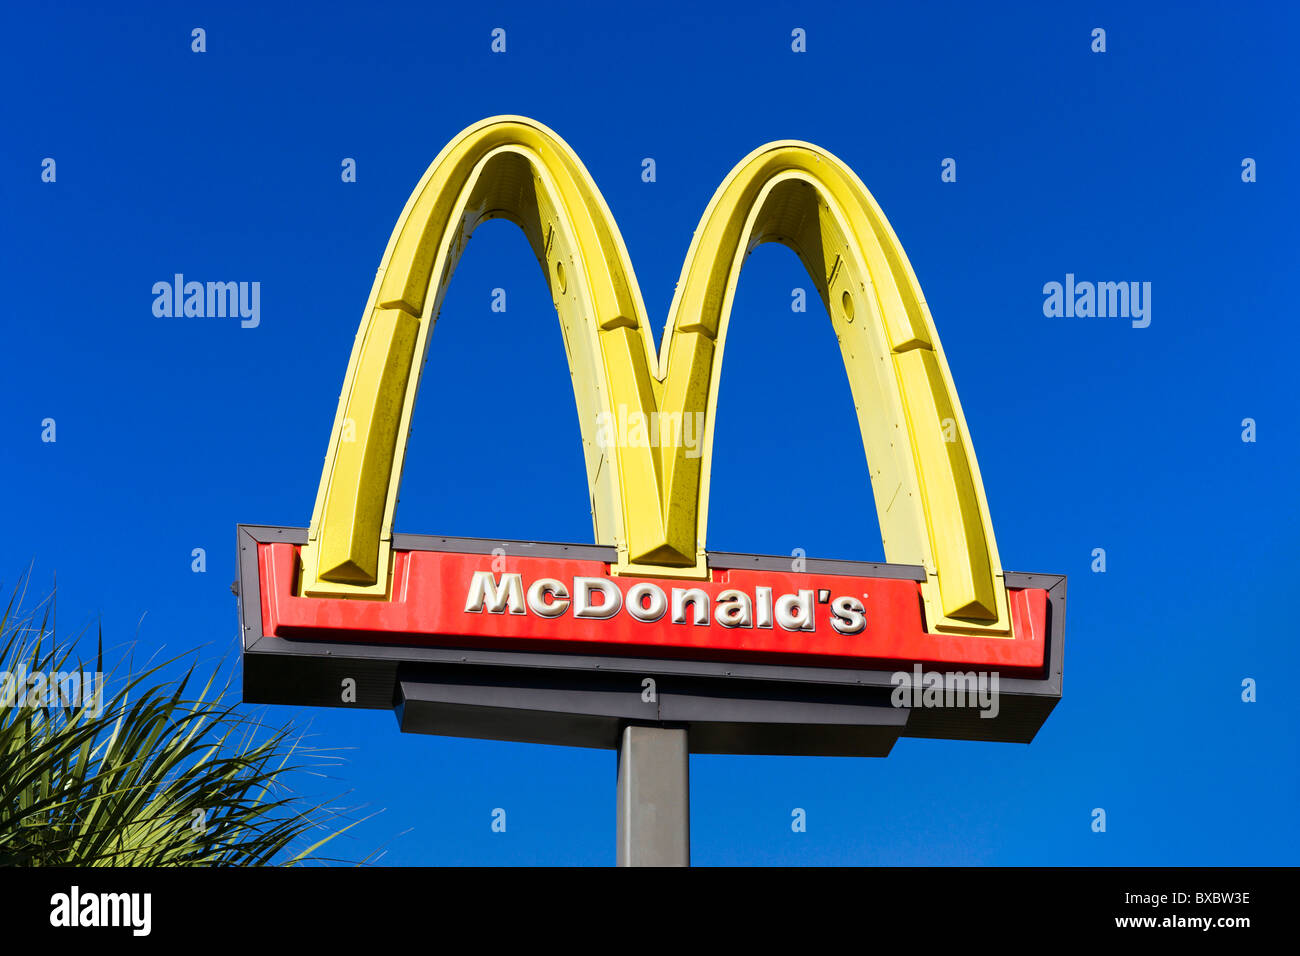 McDonald's fast food restaurant sign, Haines City, Central Florida, USA Banque D'Images